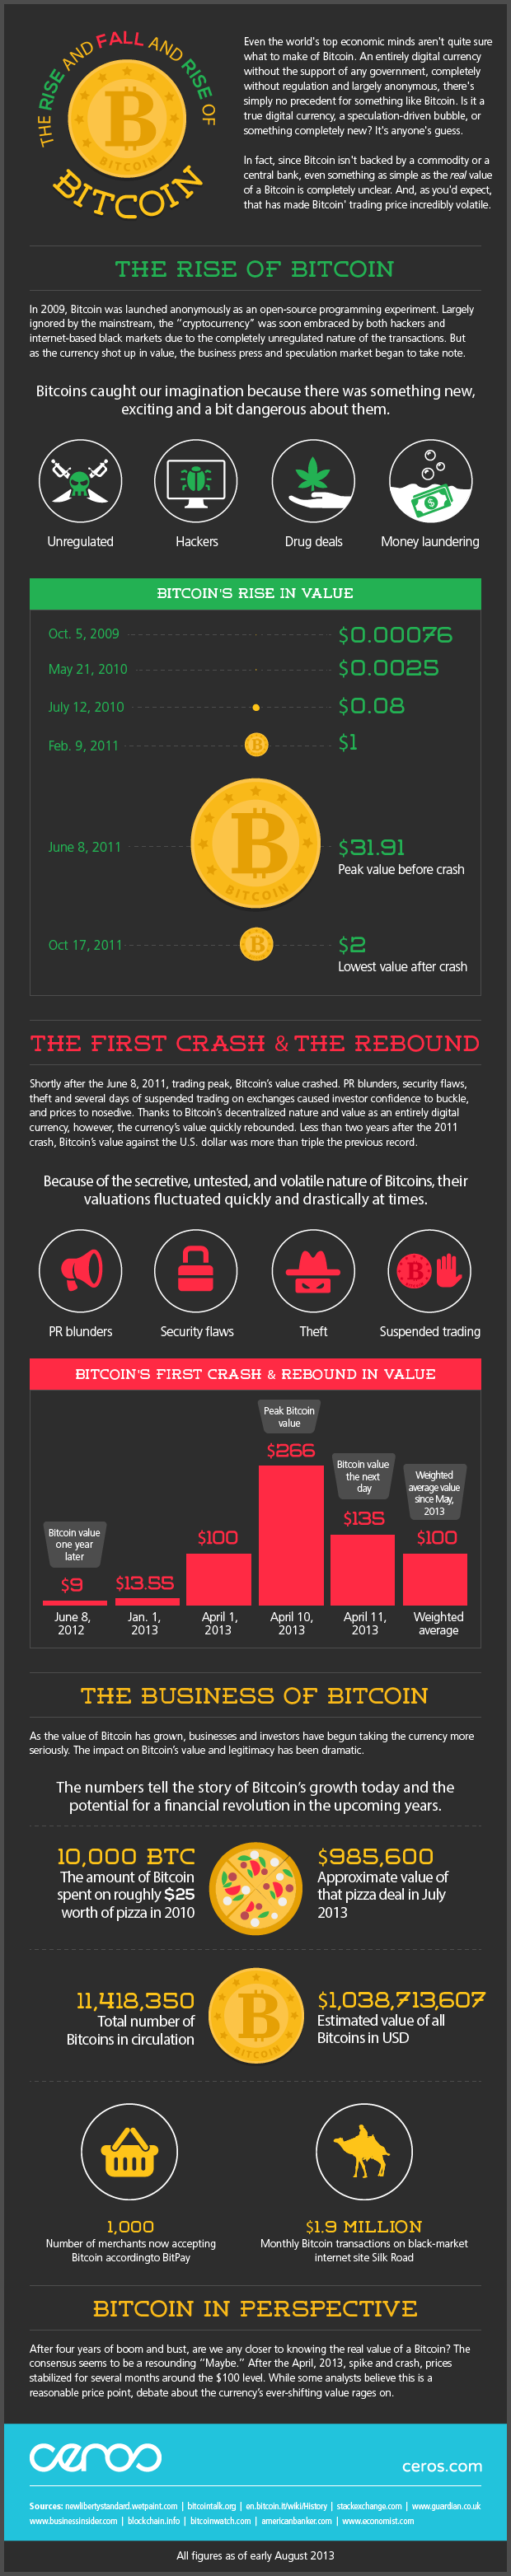 The rise and fall of bitcoins